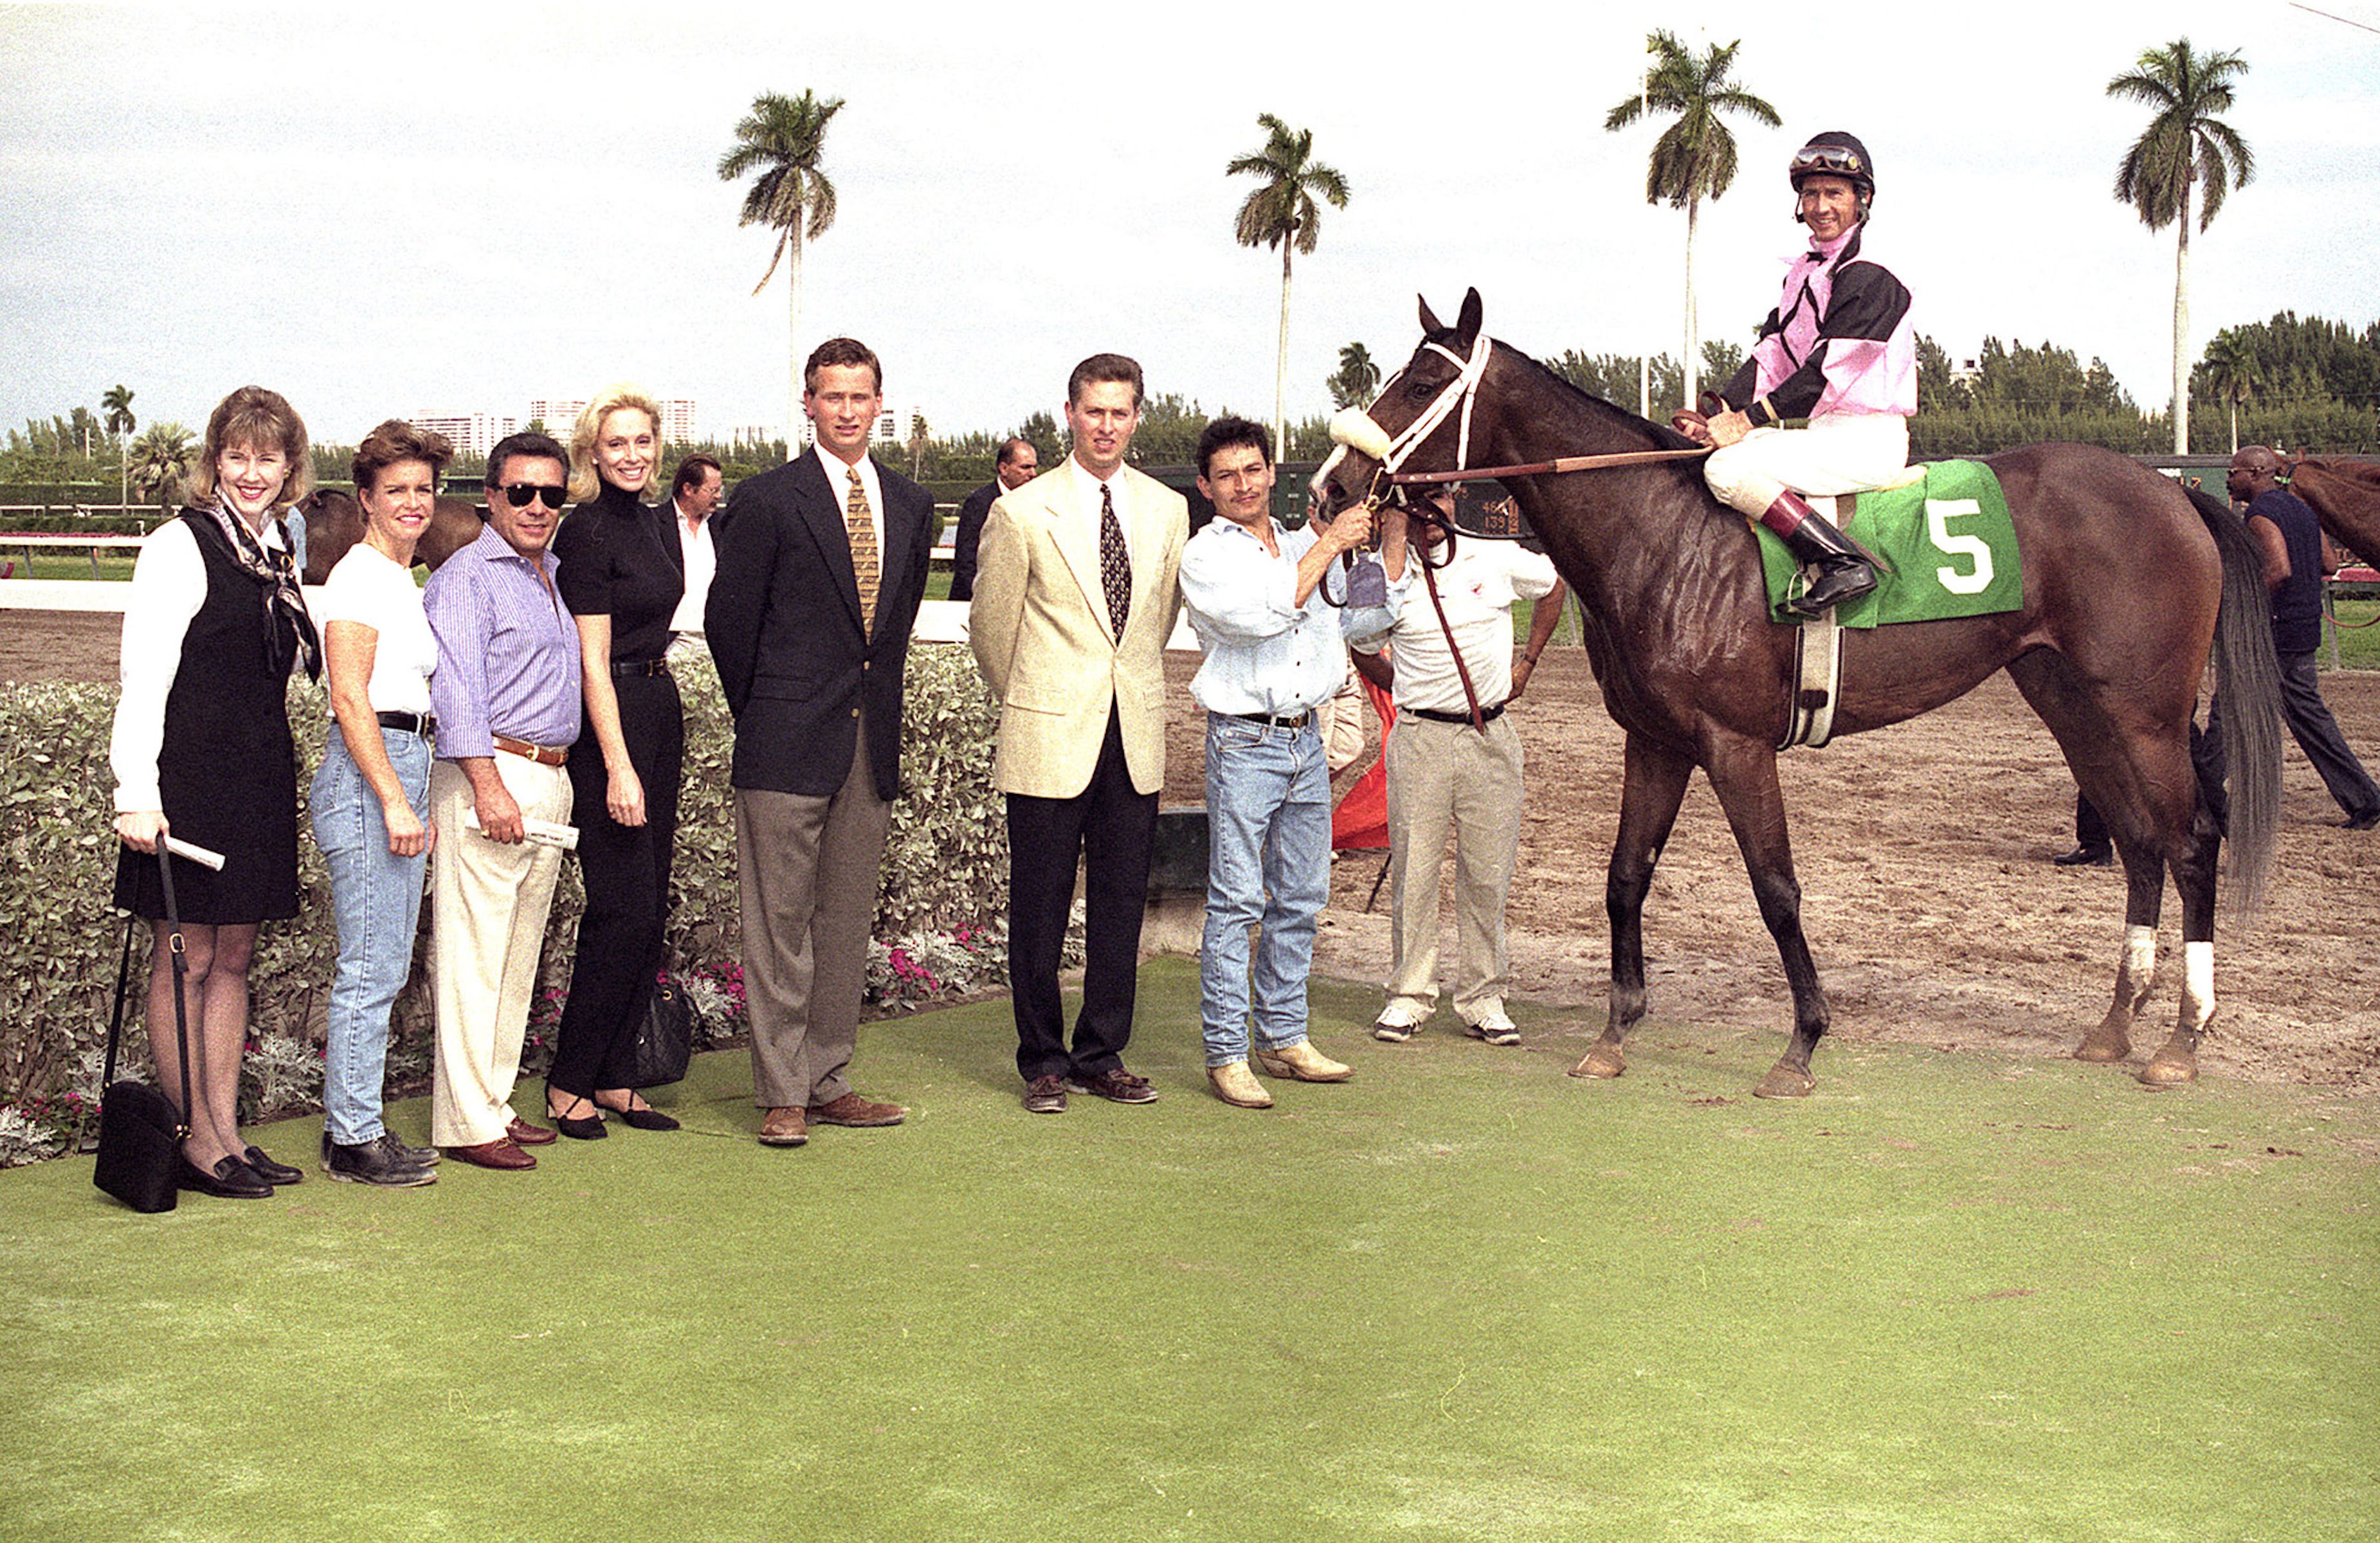 Winner's circle photo from Todd Pletcher's first career victory, Jan. 26, 1996, at Gulfstream Park with Majestic Number, Jerry Bailey up (Bill Denver/Equi-Photo, Inc.)